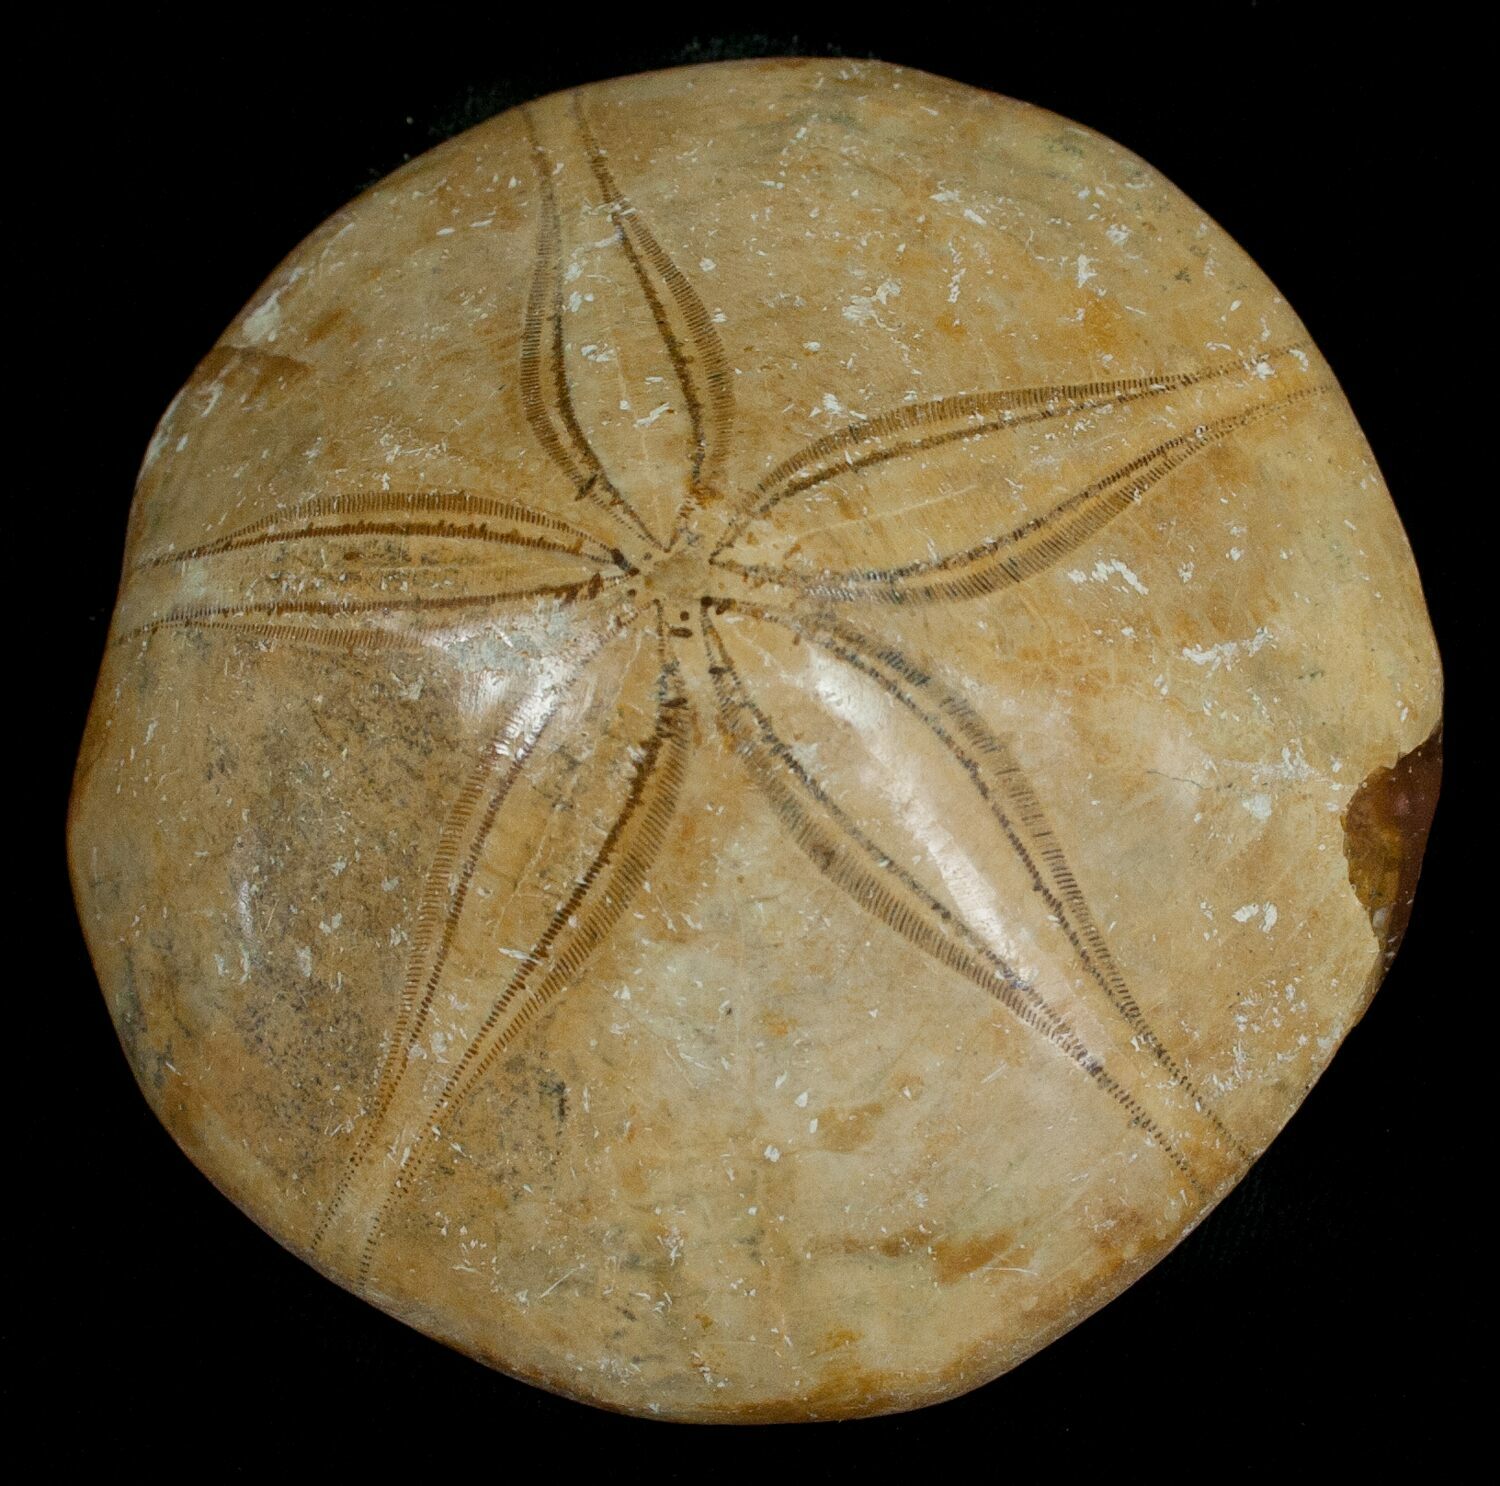 Fossil Sand Dollar From Madagascar For Sale (#5367) - FossilEra.com